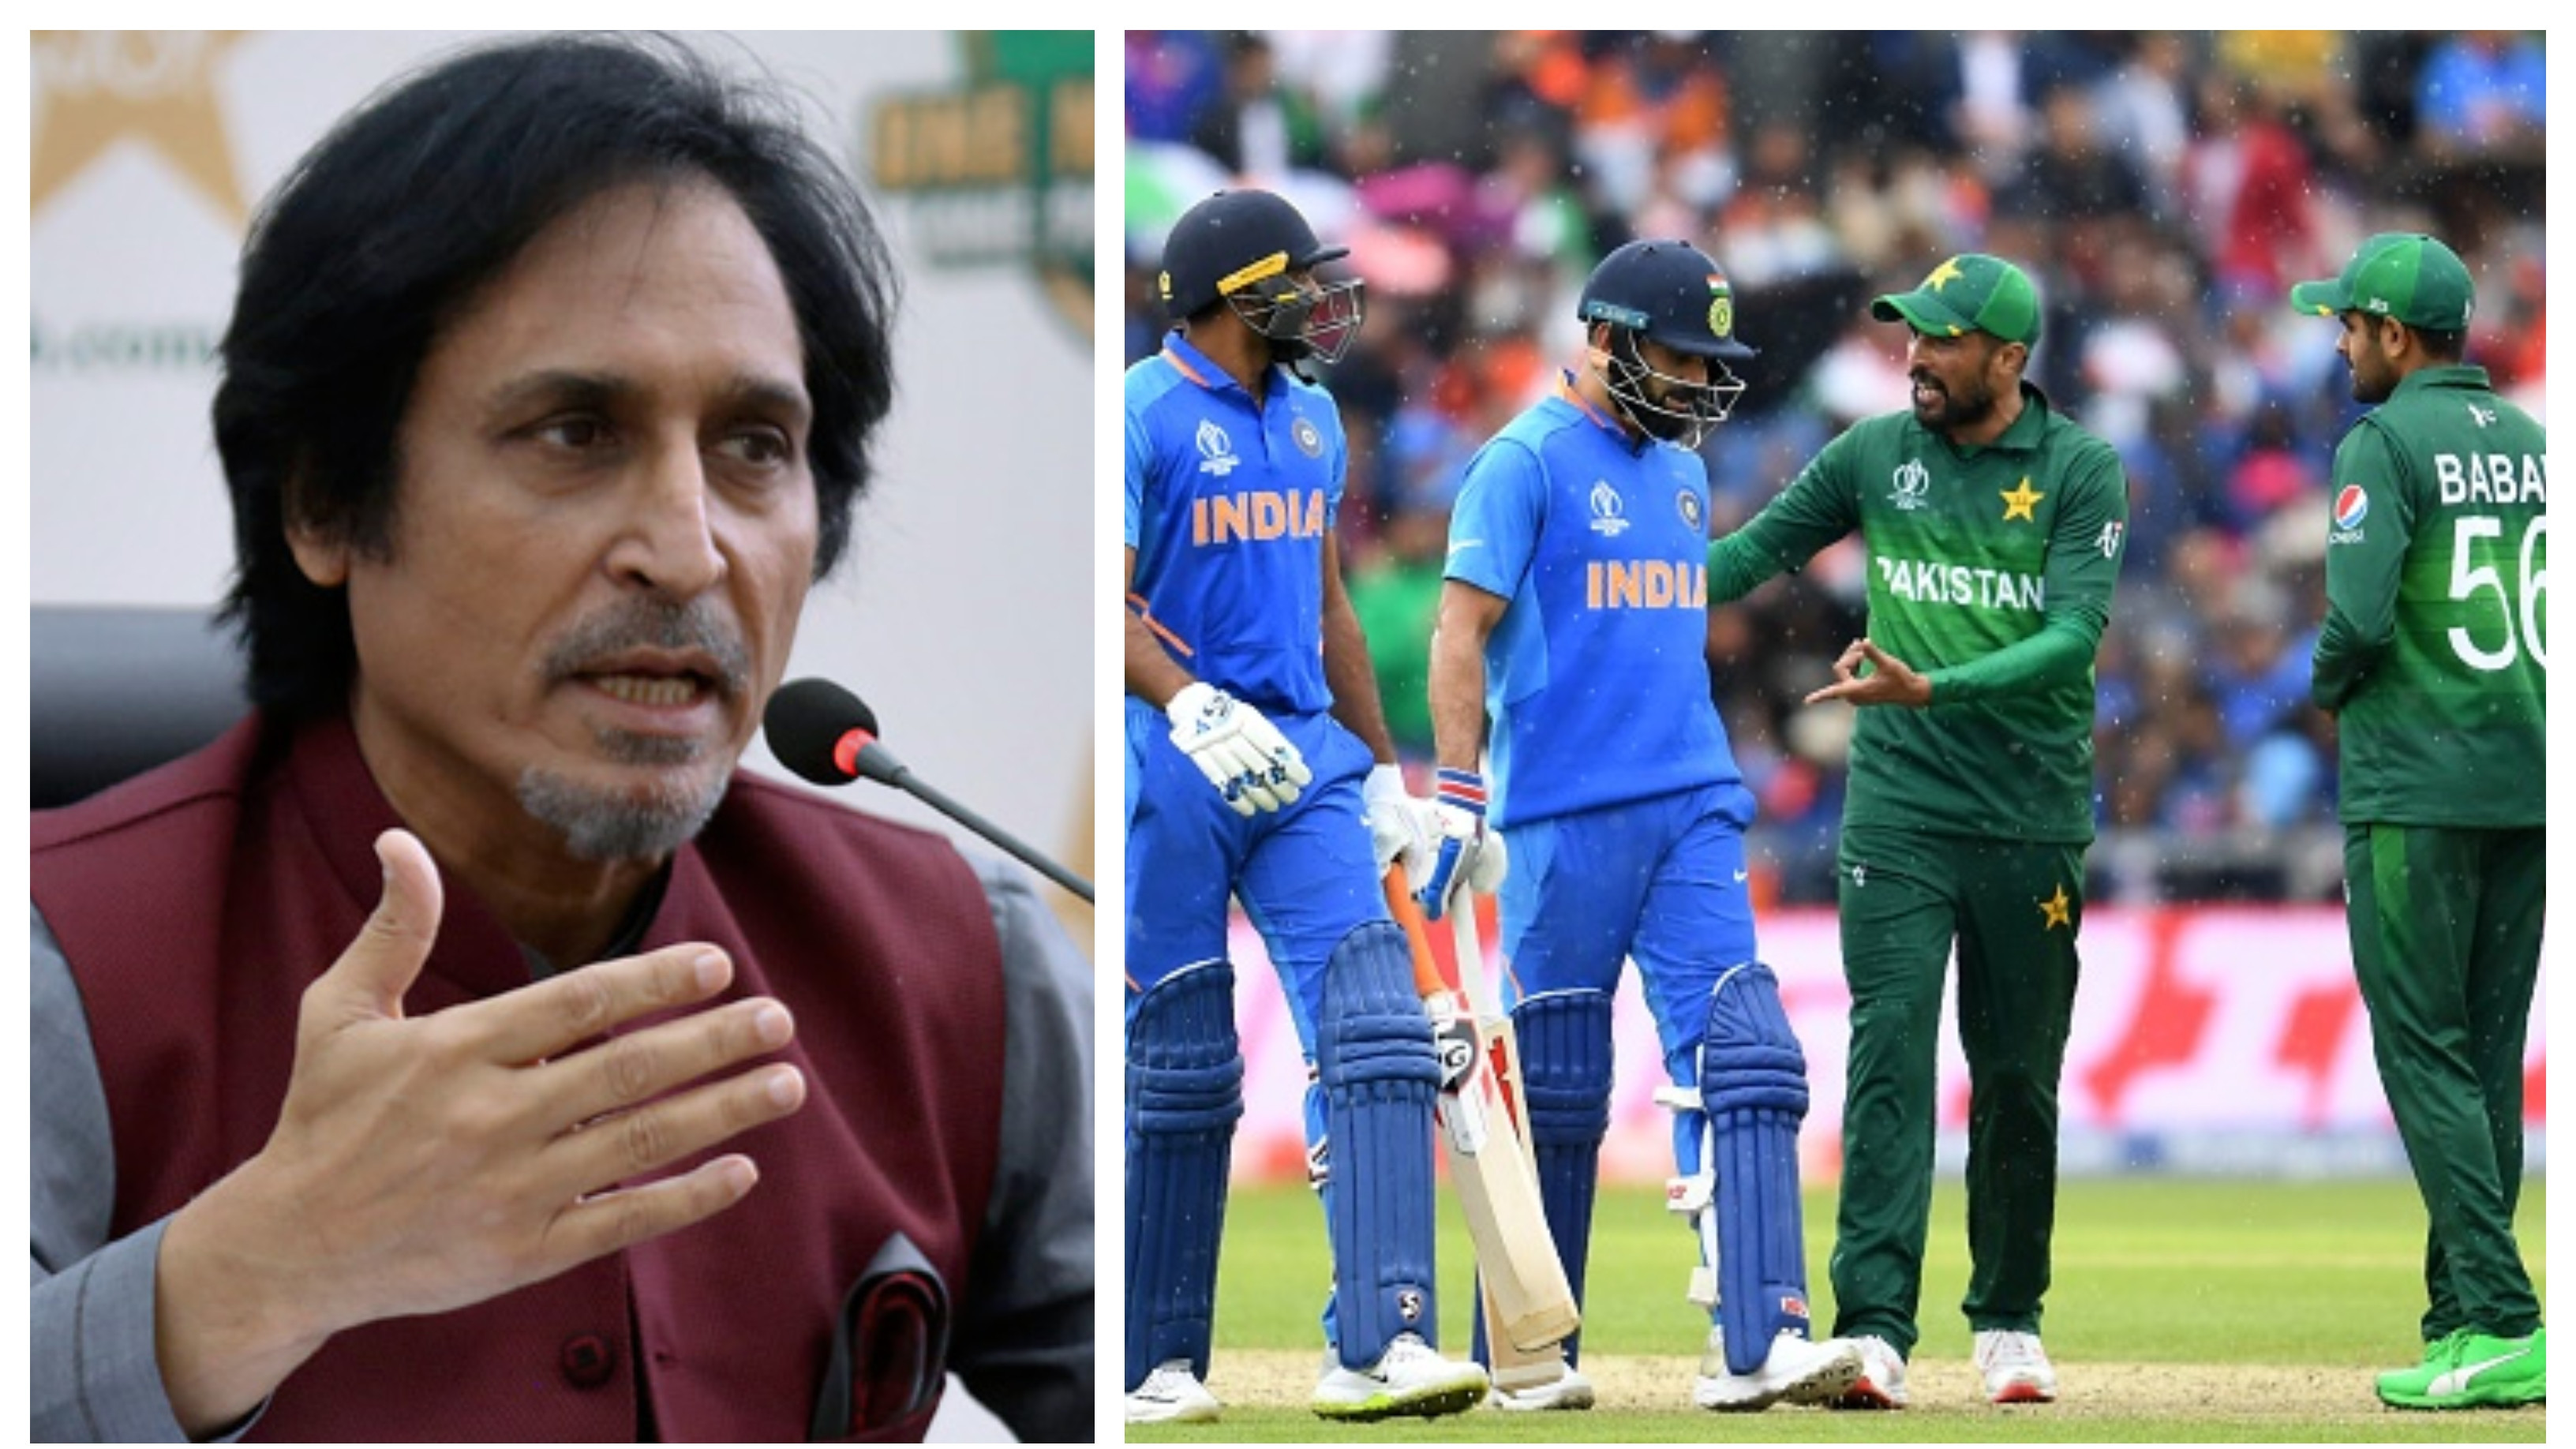 WATCH: “A lot of work needs to be done to revitalise Pakistan-India cricket”, says PCB chief Ramiz Raja